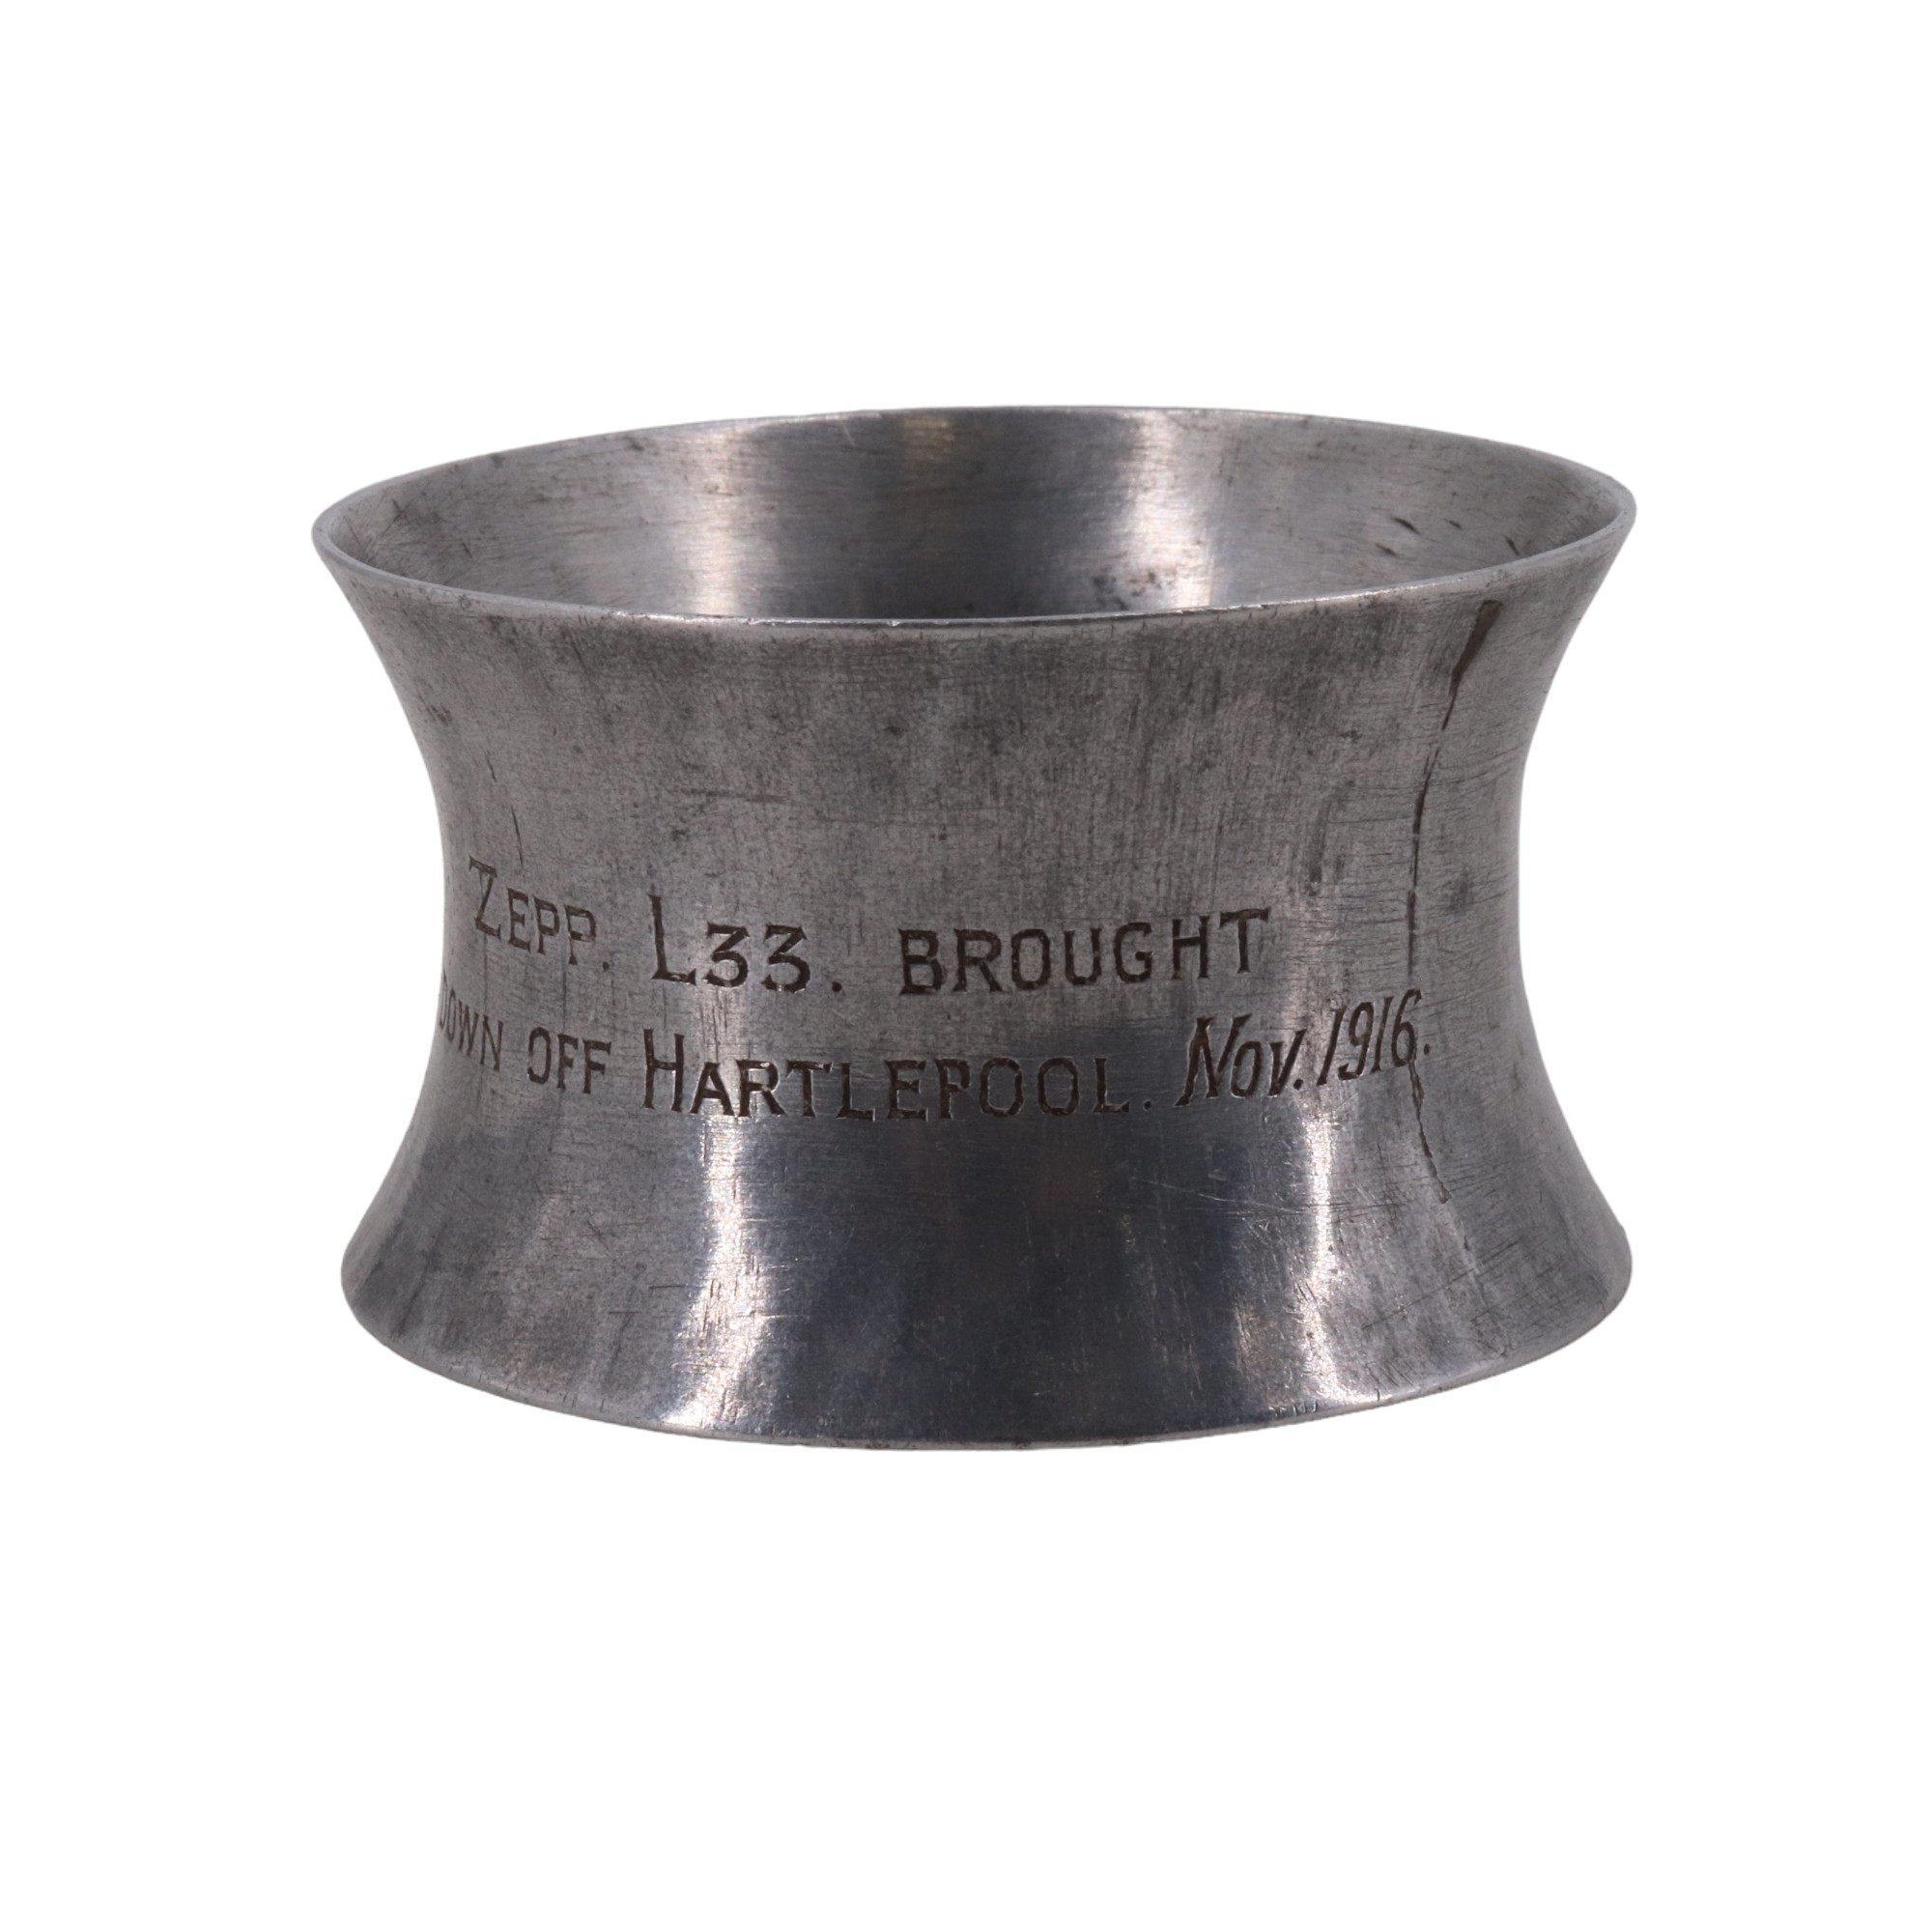 An aluminium alloy napkin ring engraved "Zepp L33 [sic] brought down of Hartlepool, Nov 1916". [On